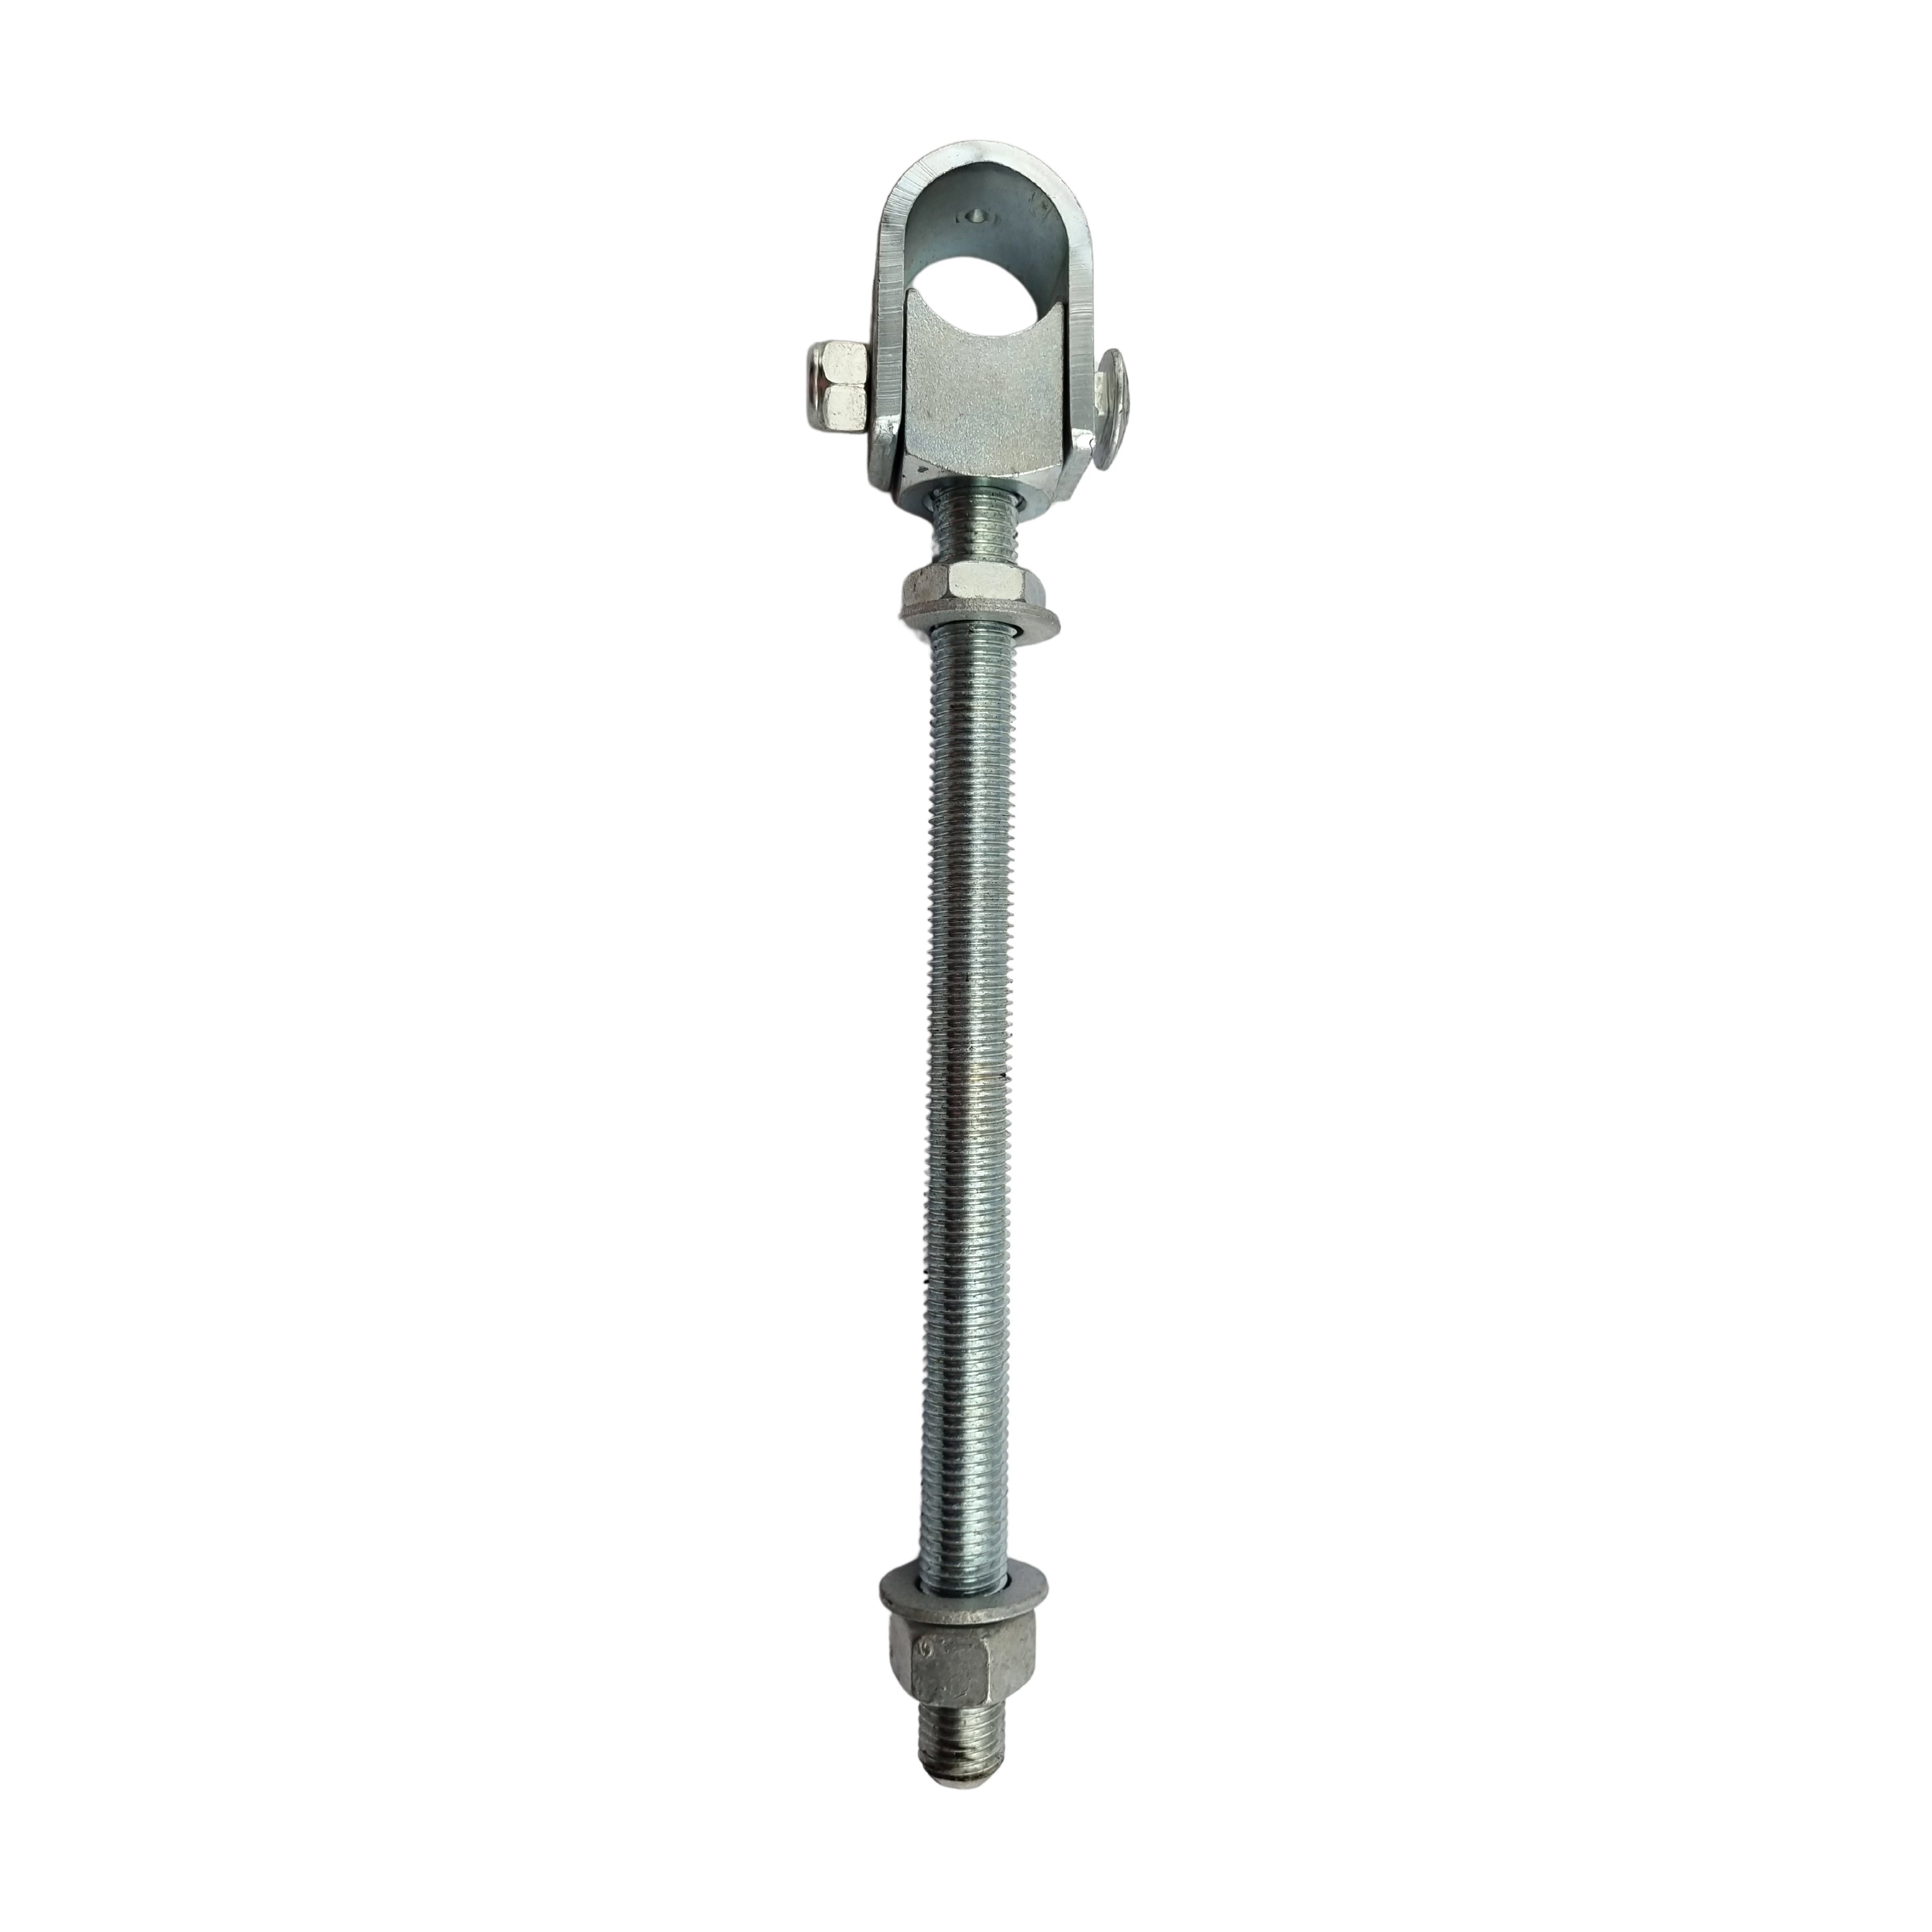 Deluxe hinge suitable for automatic gates, Australian made. Fence & gate fittings online - chain.com.au. Australia wide shipping.